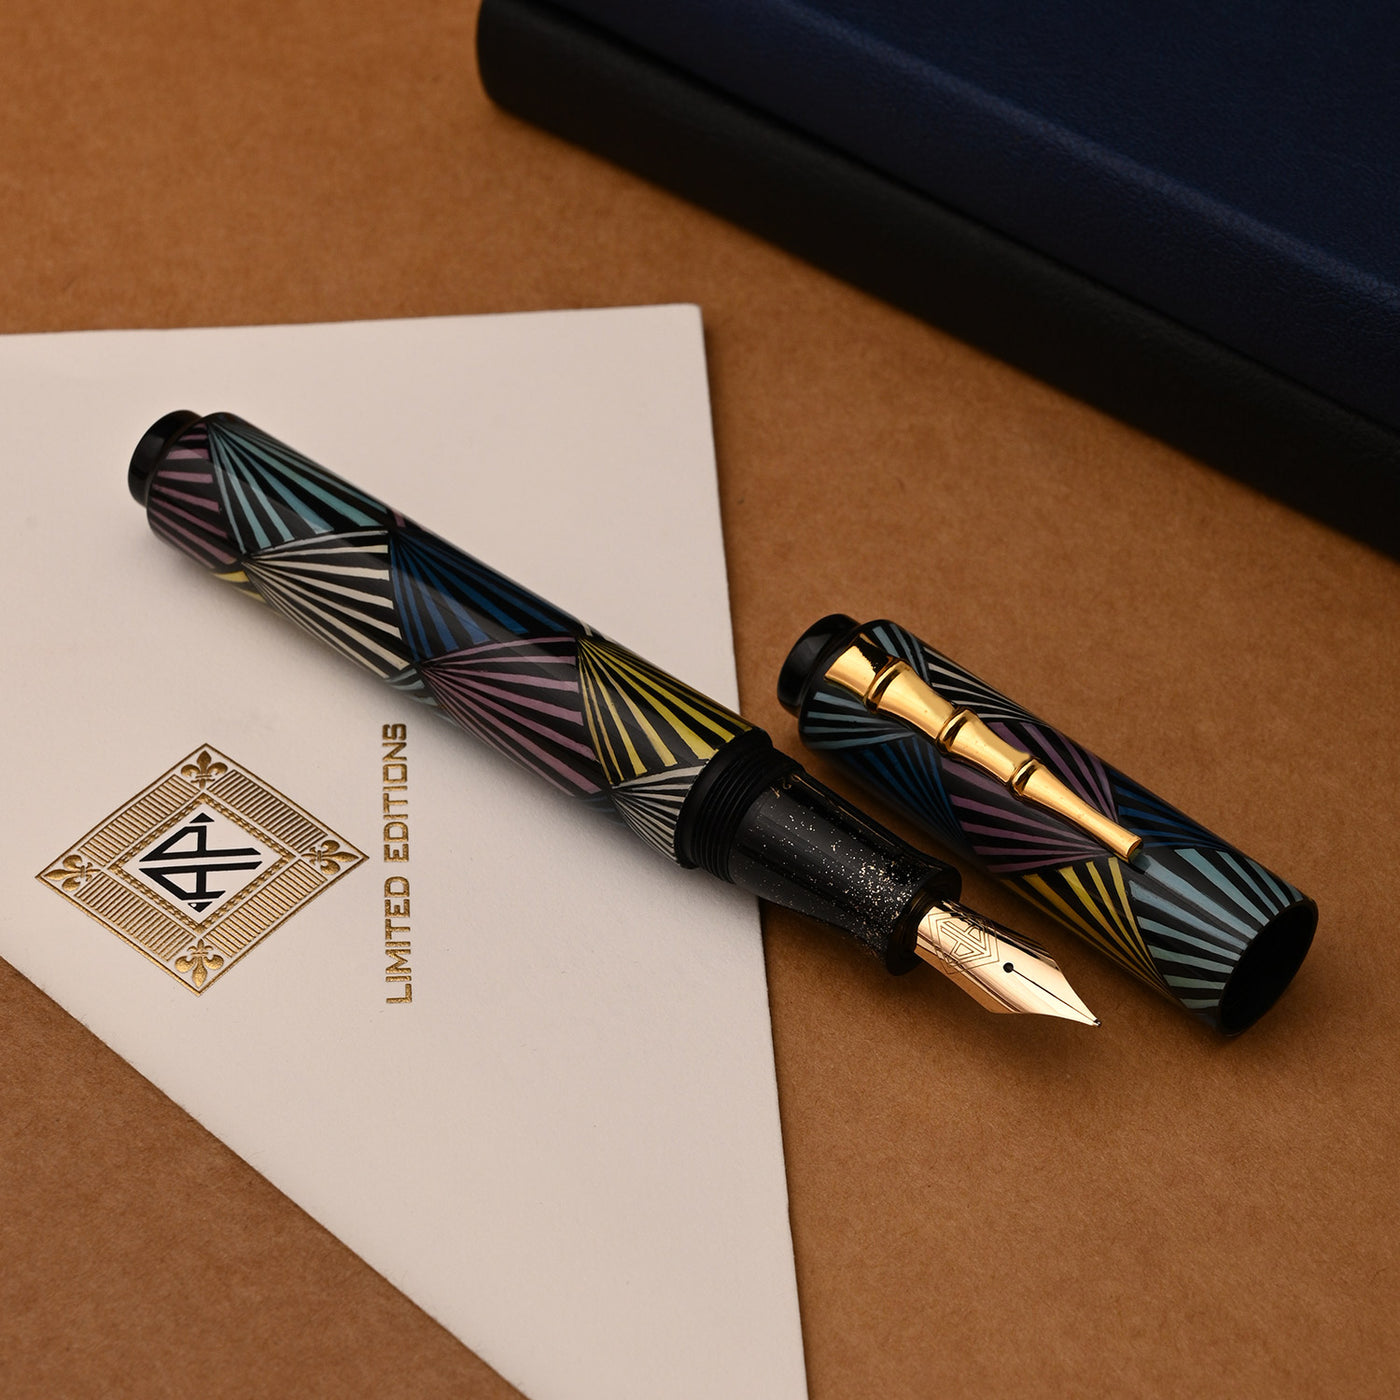 AP Limited Editions Russian Lacquer Art Fountain Pen - An Ode to Art Deco 6